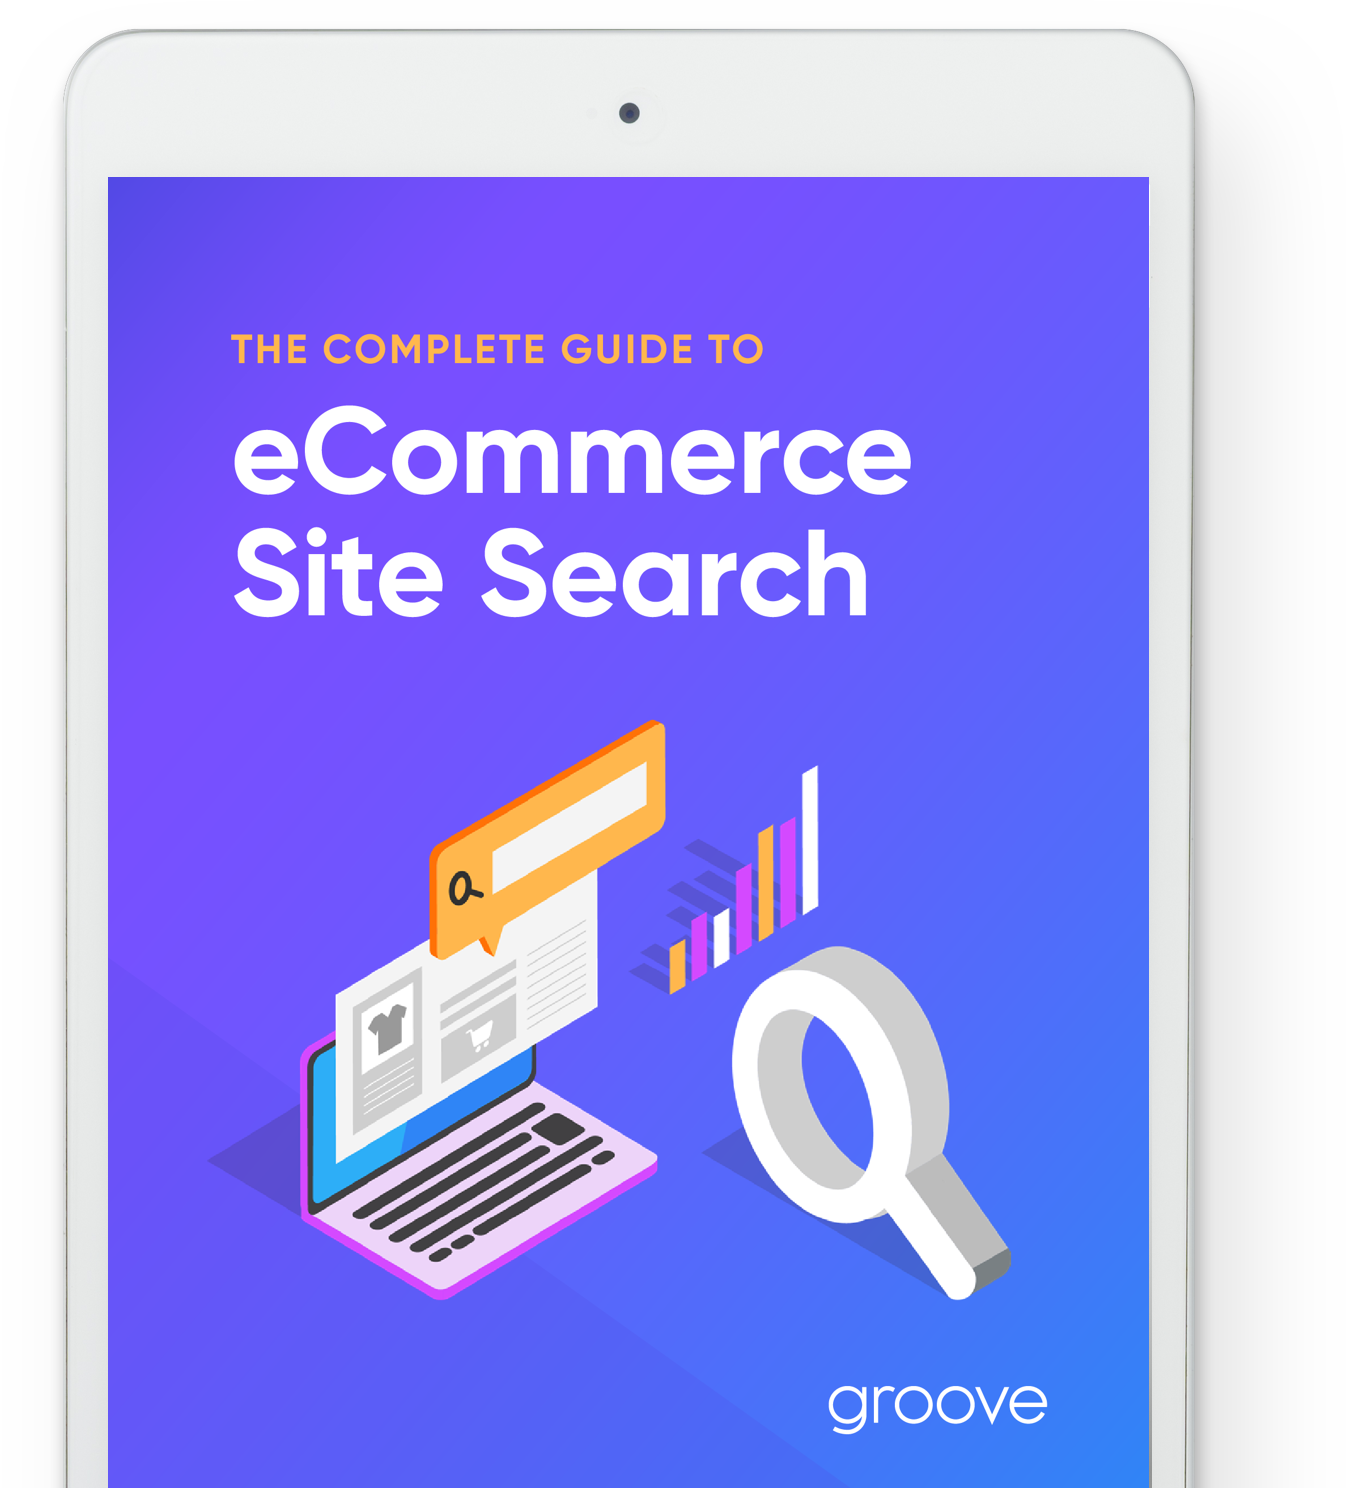 eCommerce SIte Search Guide